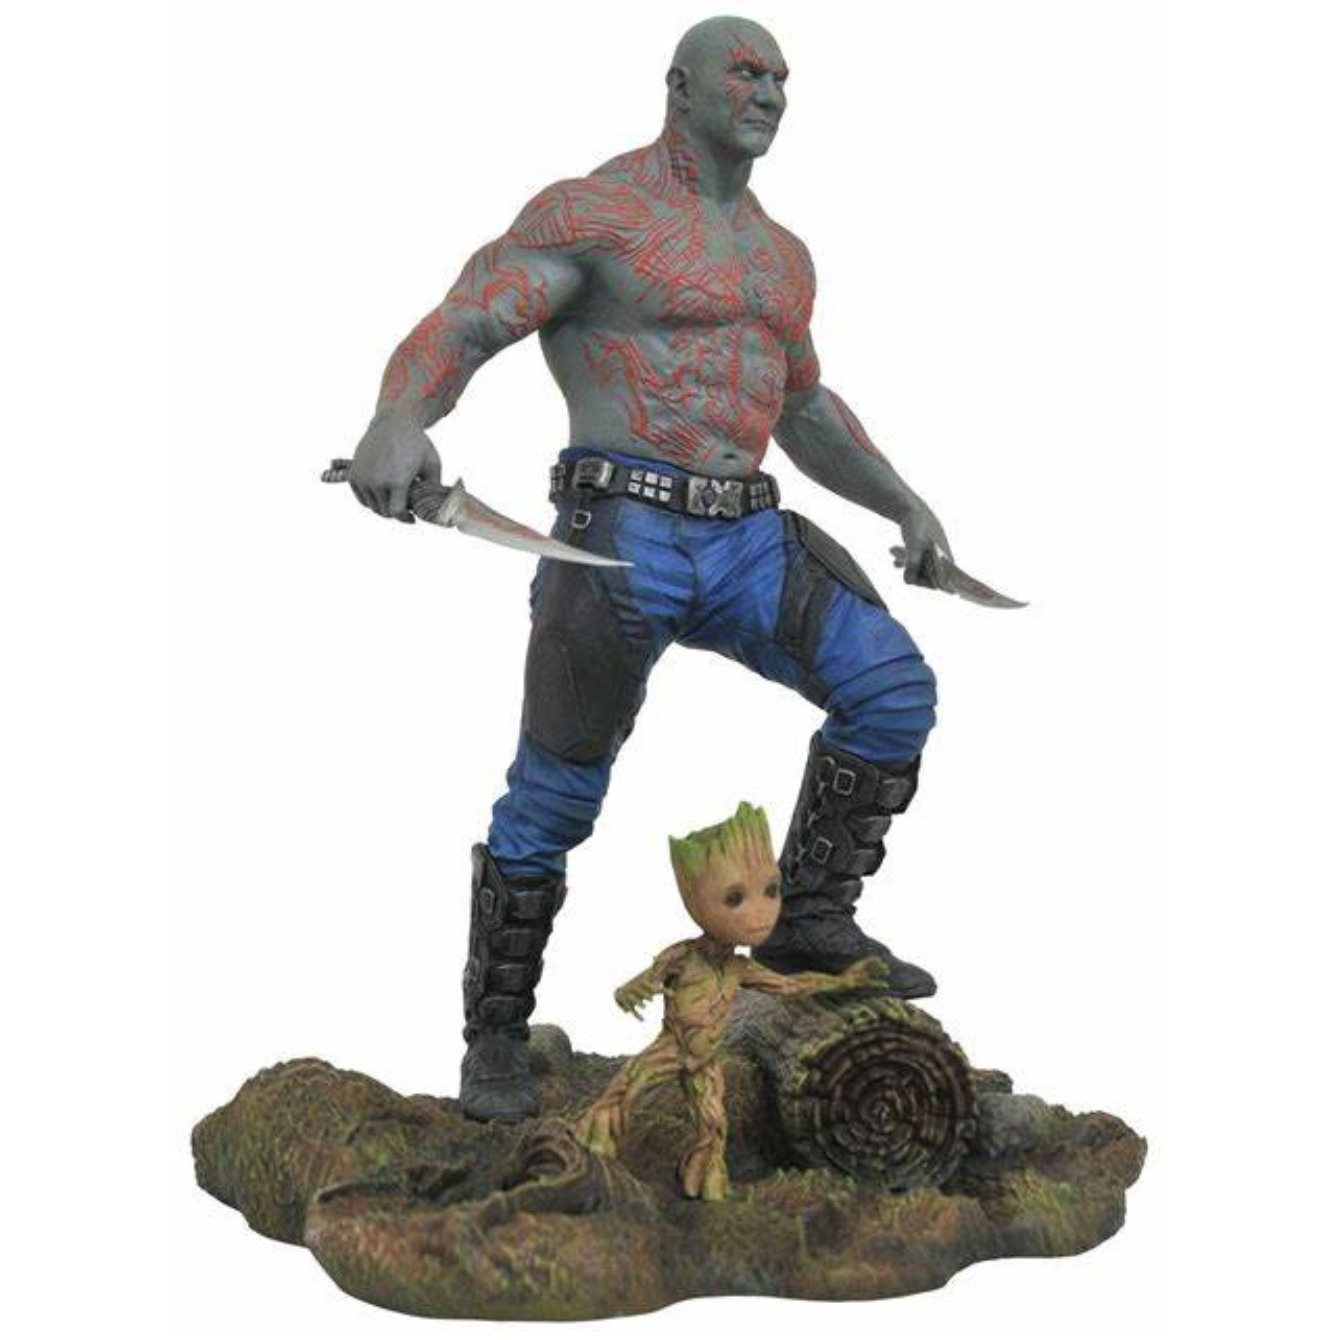 Marvel Gallery Guardians of the Galaxy Vol. 2 Drax and Baby Groot Statue